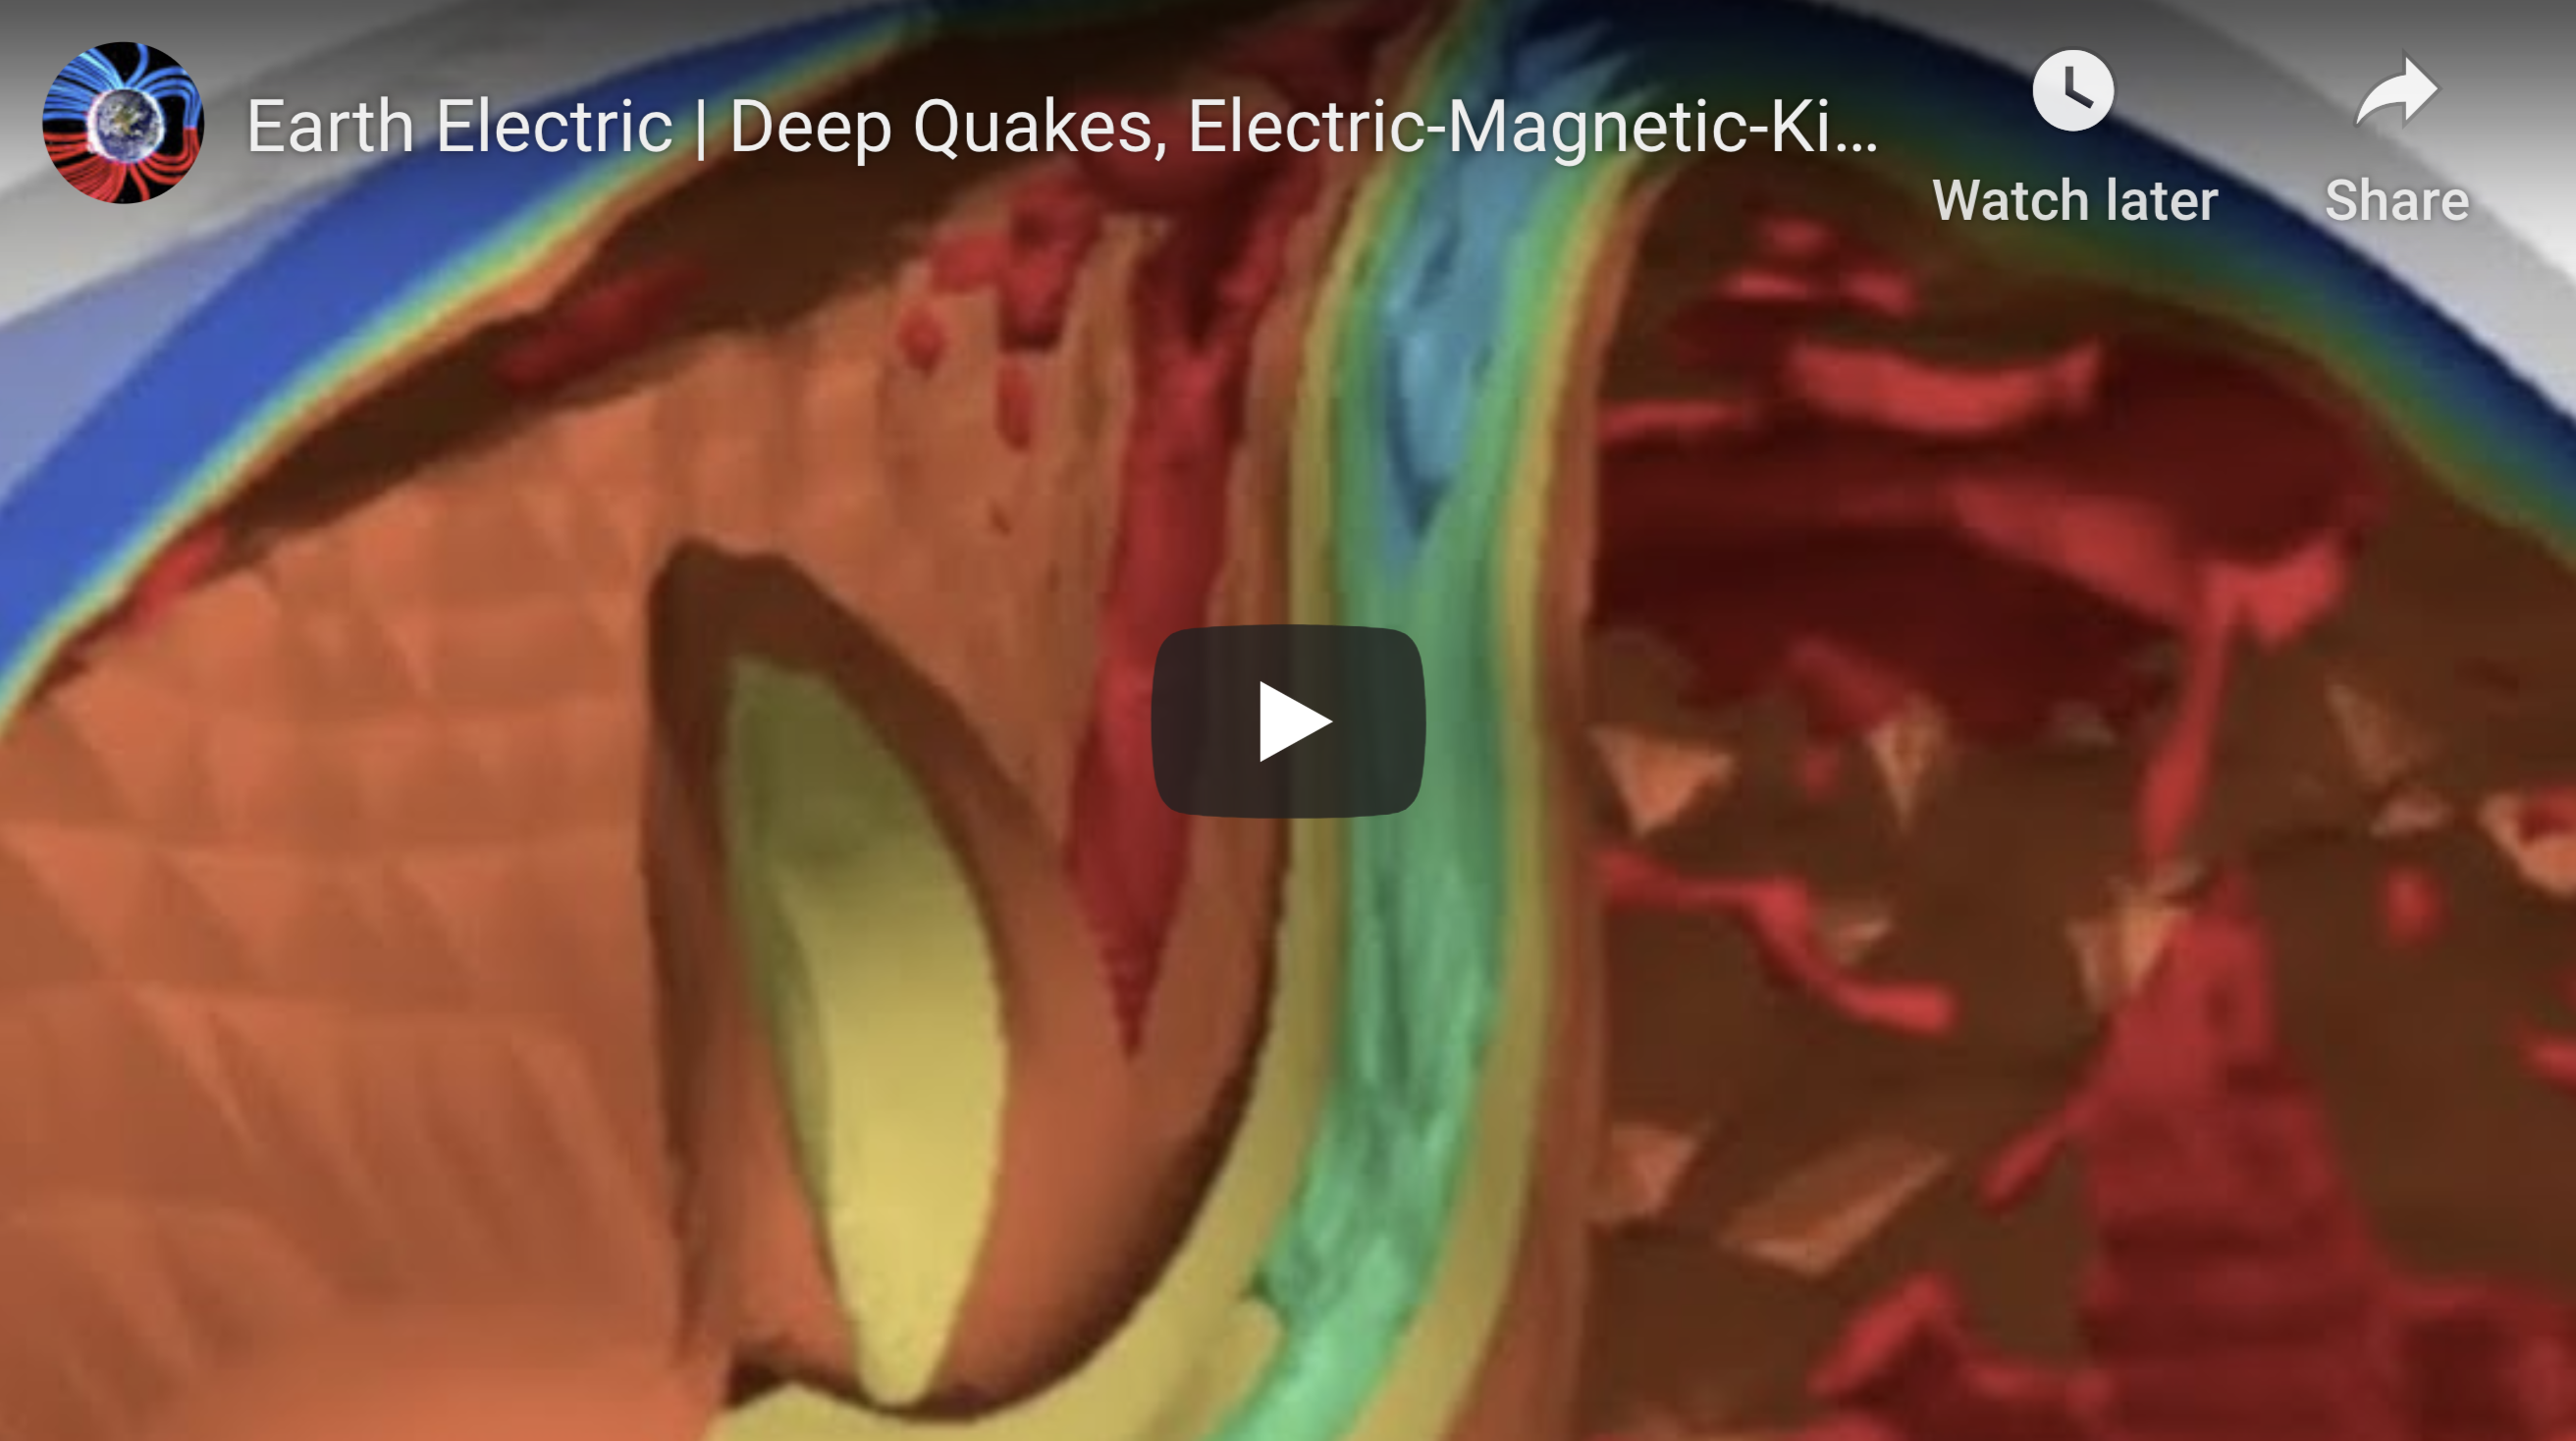 Earth Electric Deep Quakes Electric Magnetic Kinetic EXZM Suspicious Observers post July 16th 2020